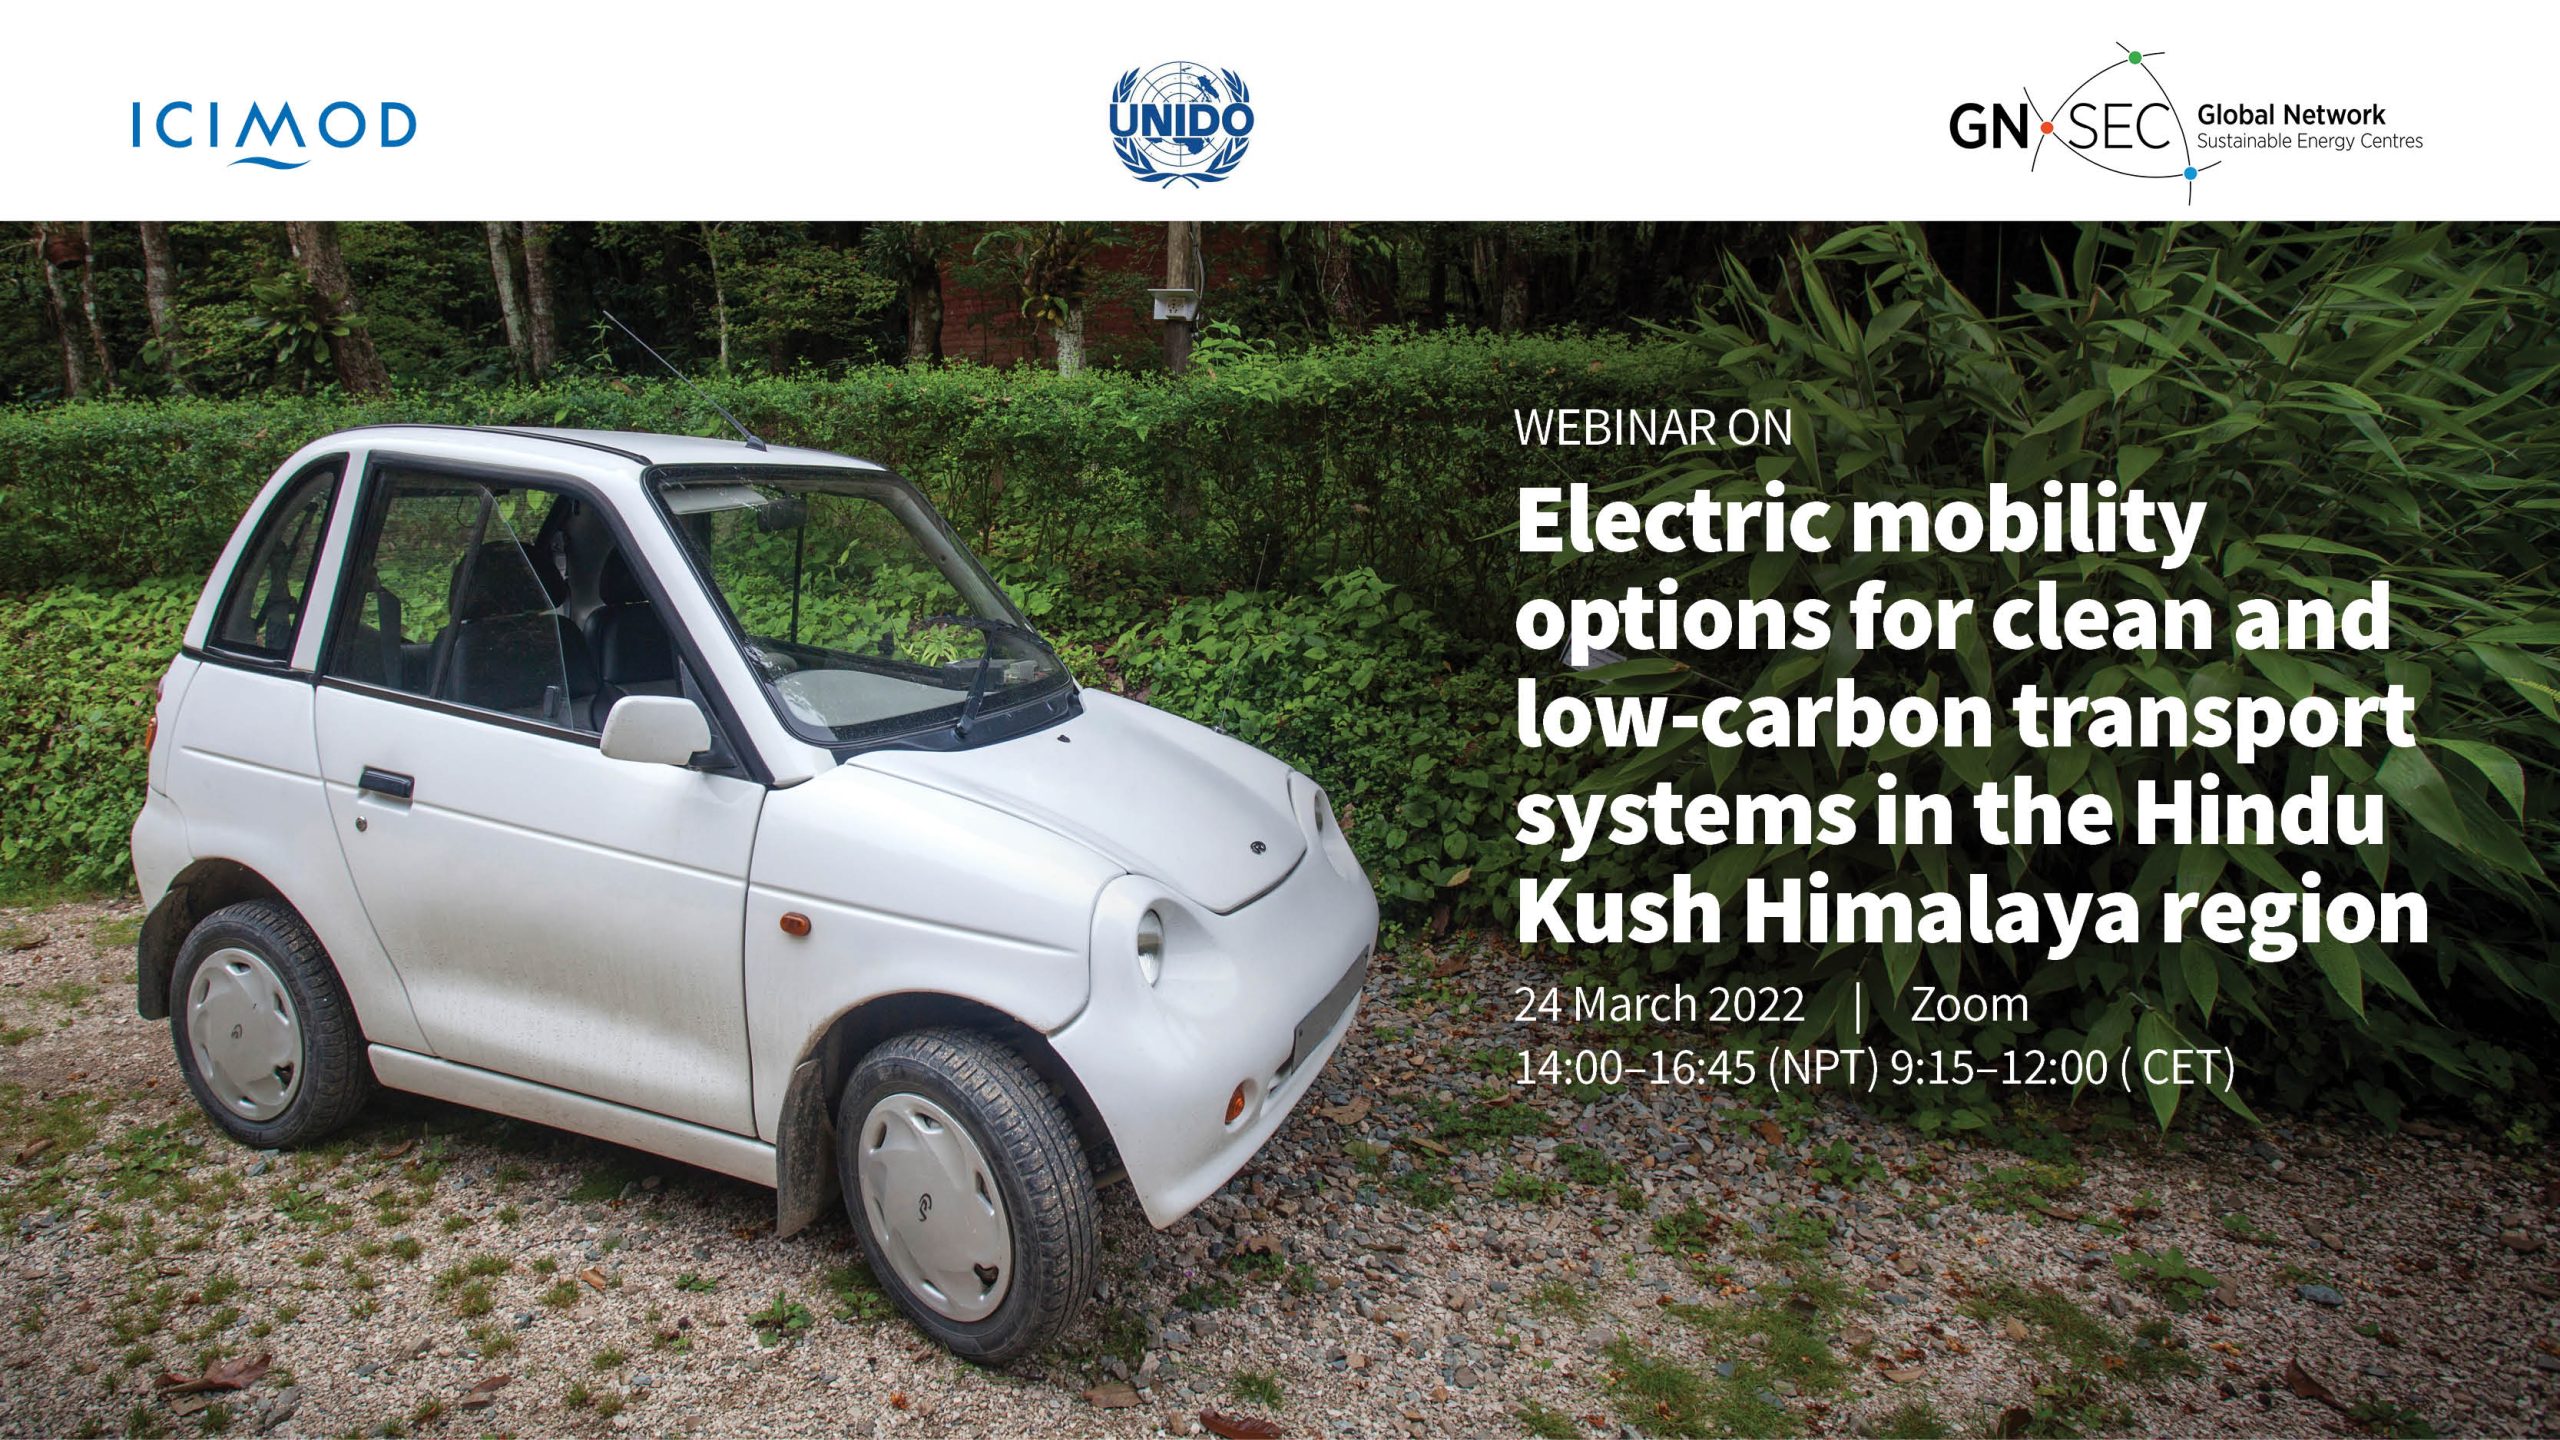 Electric mobility options for clean and low-carbon transport systems in the Hindu Kush Himalaya region